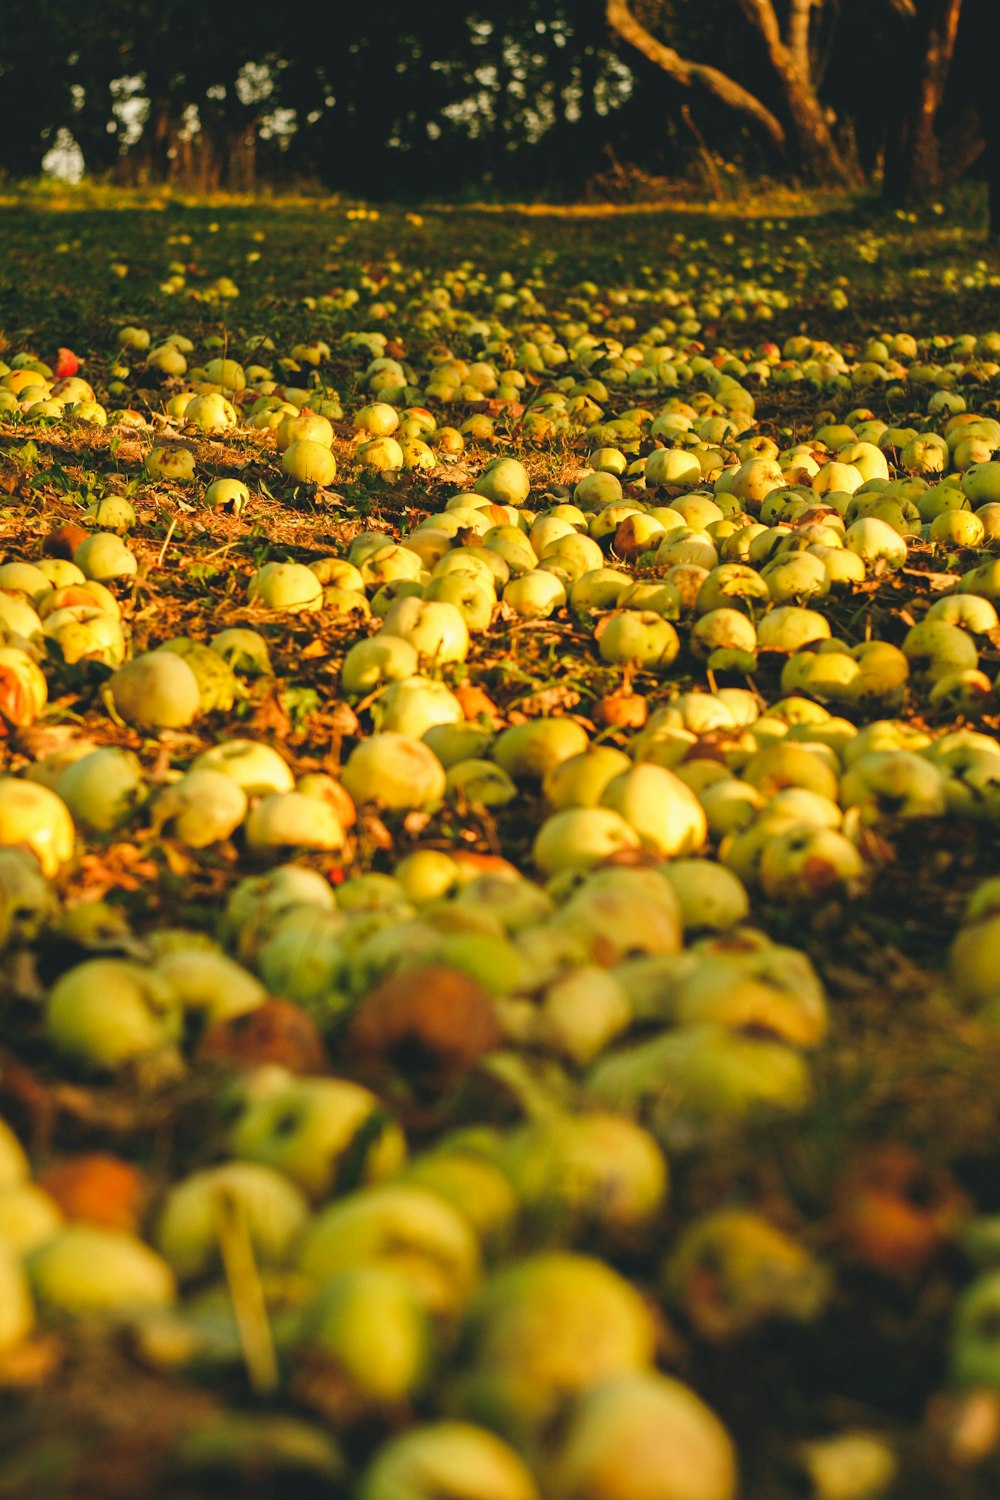 a field full of green apples sitting on top of a grass covered field